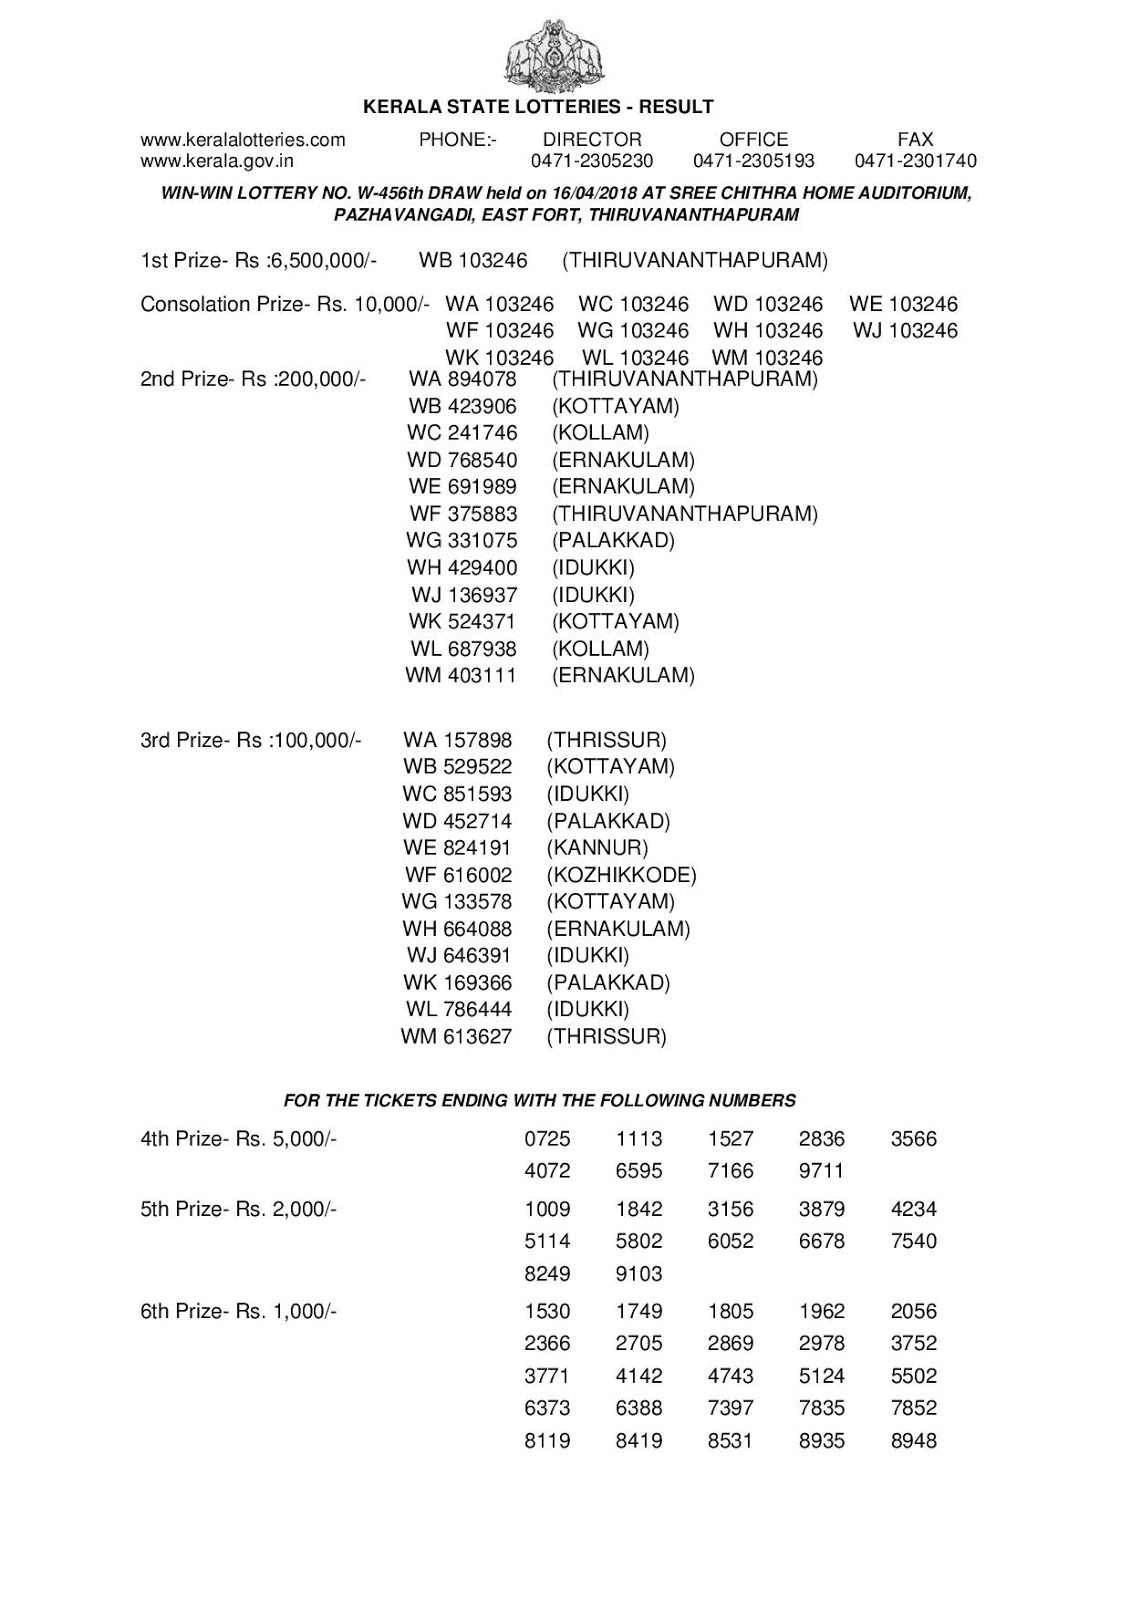 Kerala Lottery Result Today 16.04.2018 Win Win W-456 Lottery Results Official PDF